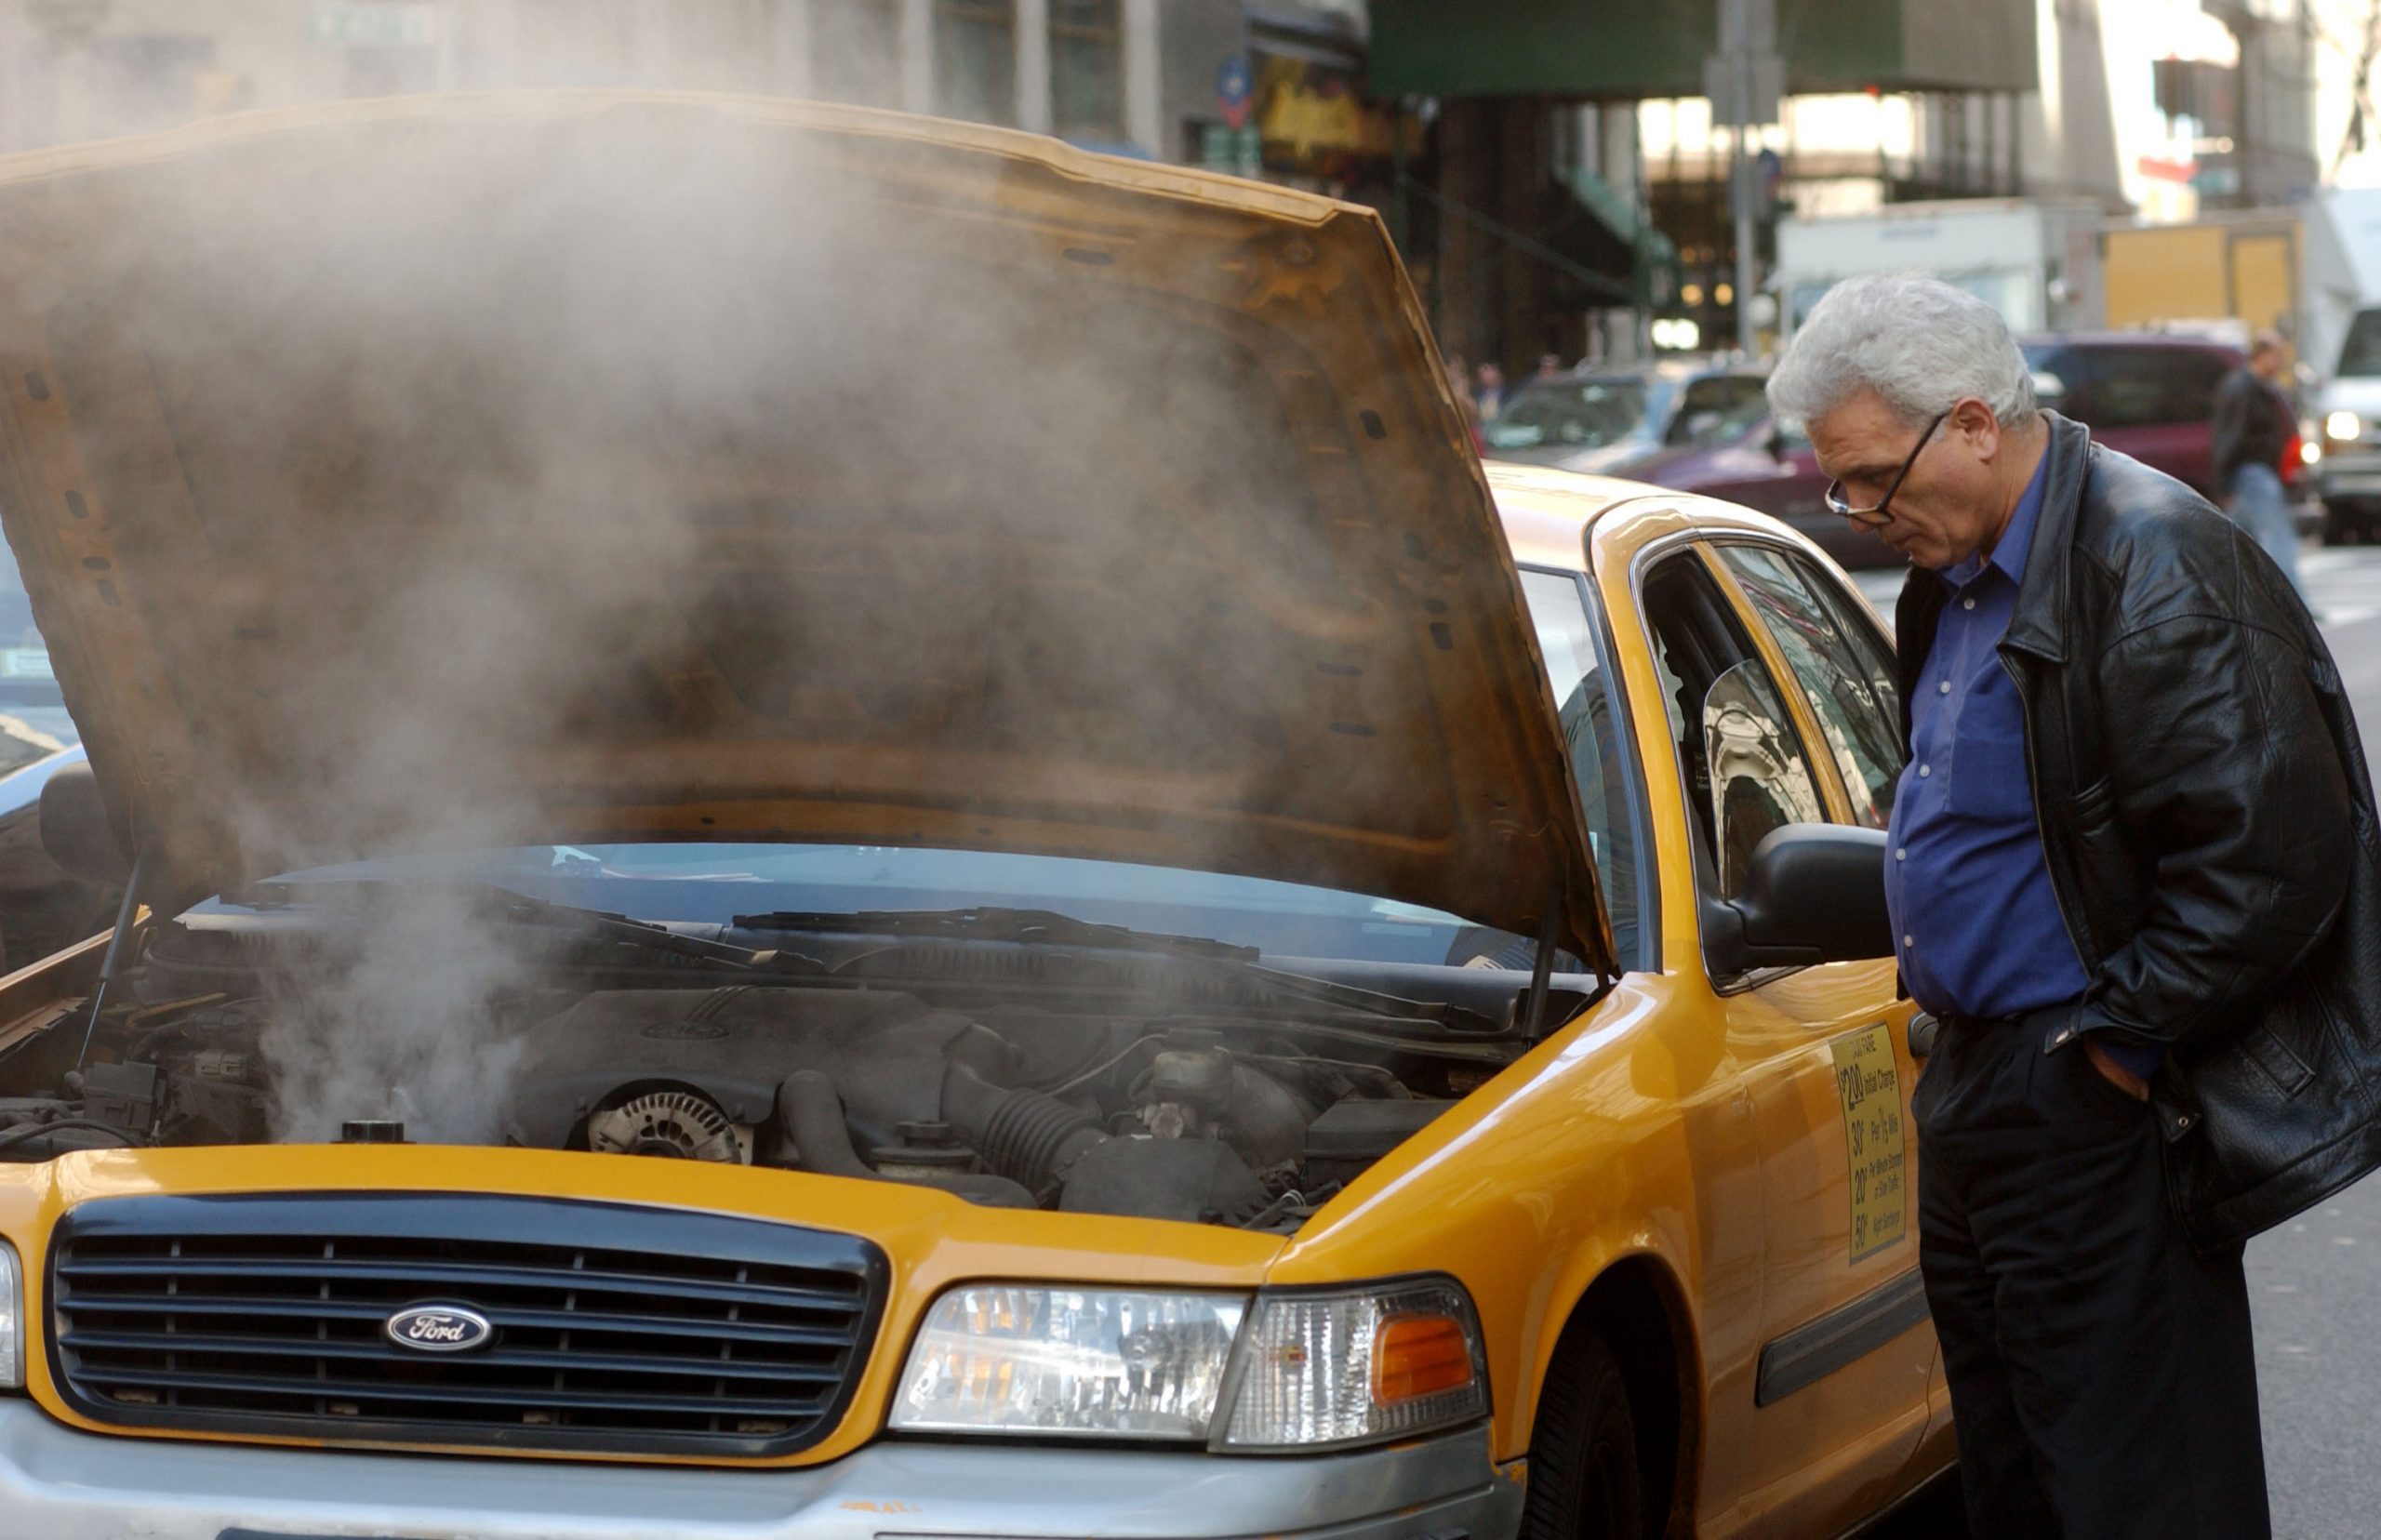 taxi cab overheats shooting steam out from under the hood. This is why you should flush your coolant system